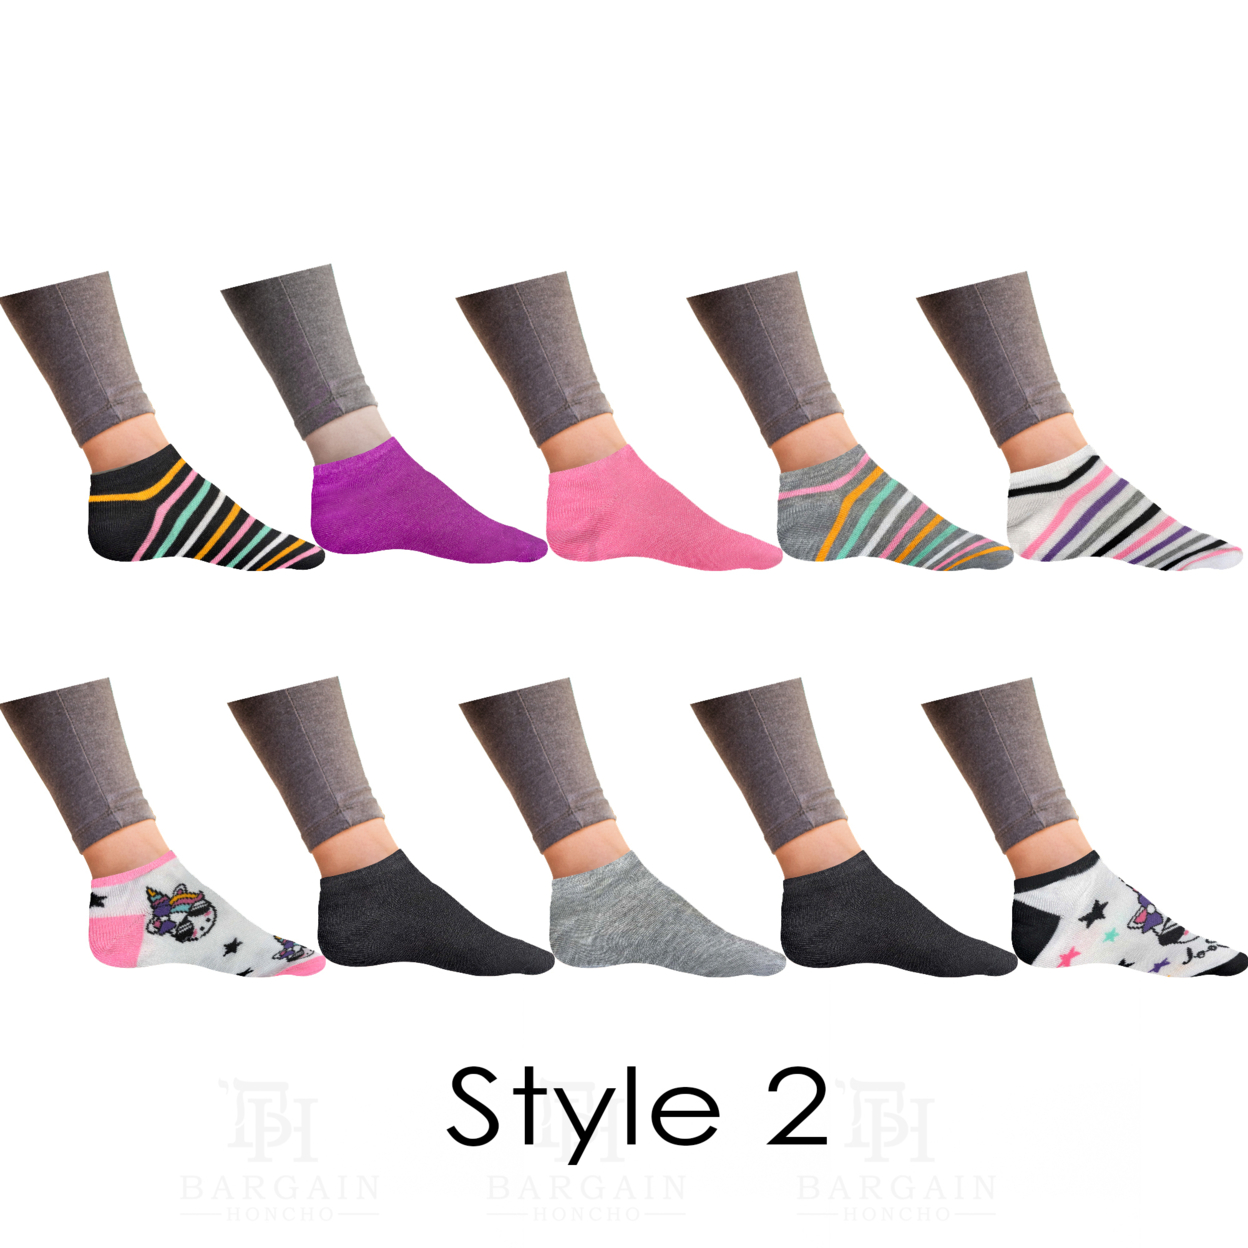 20-Pairs: Women’s Breathable Colorful Fun No Show Low Cut Ankle Socks - 1 & 6